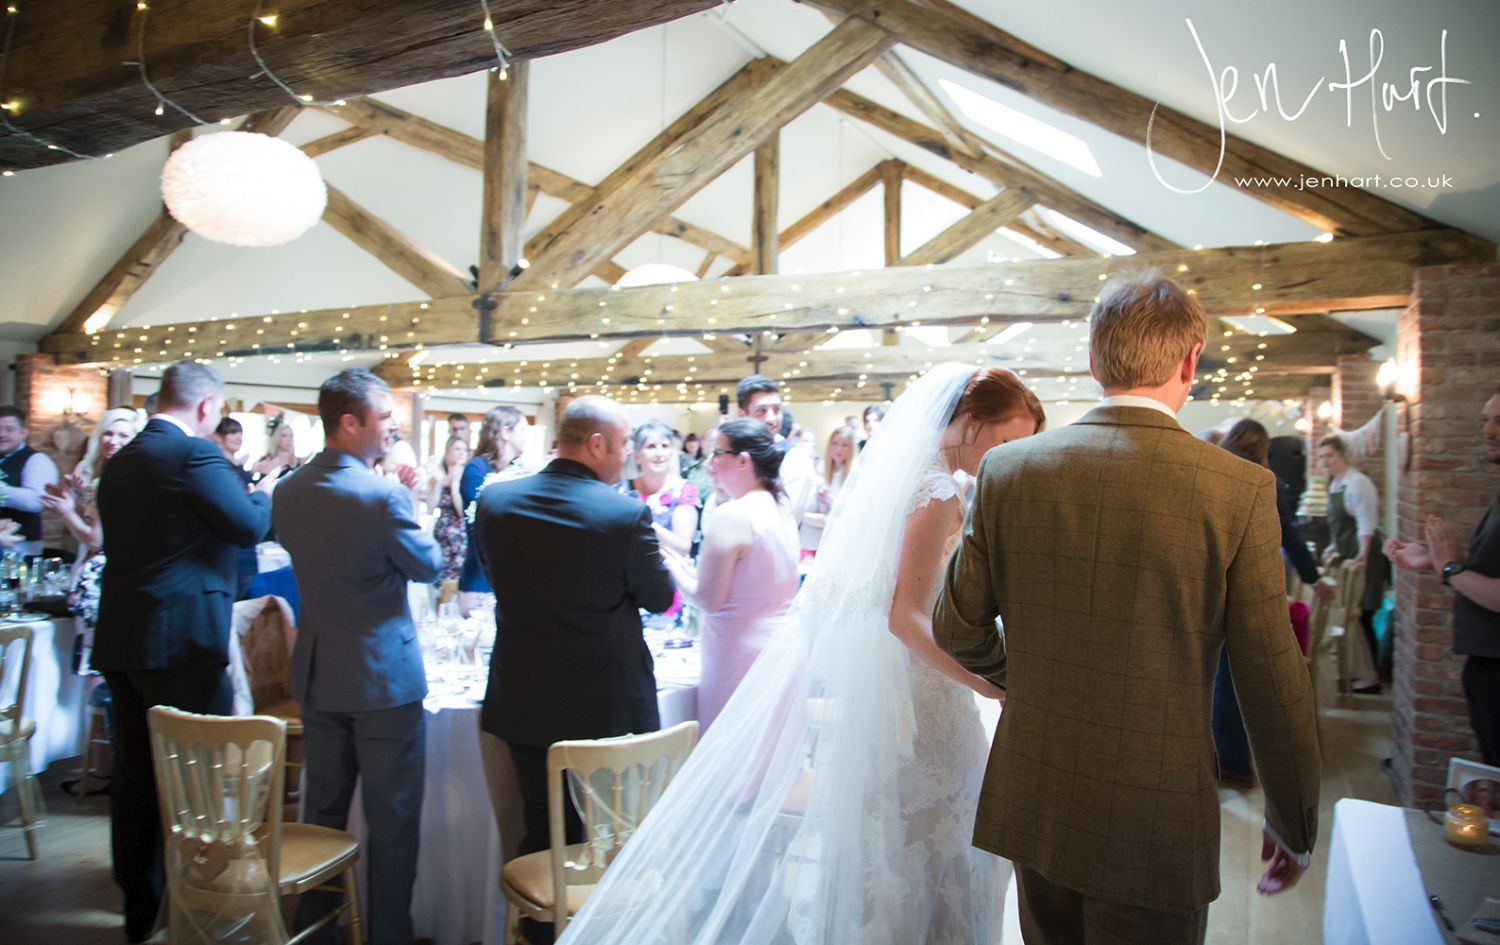 Photograph-Wedding-Whinstone-View_02May15_224